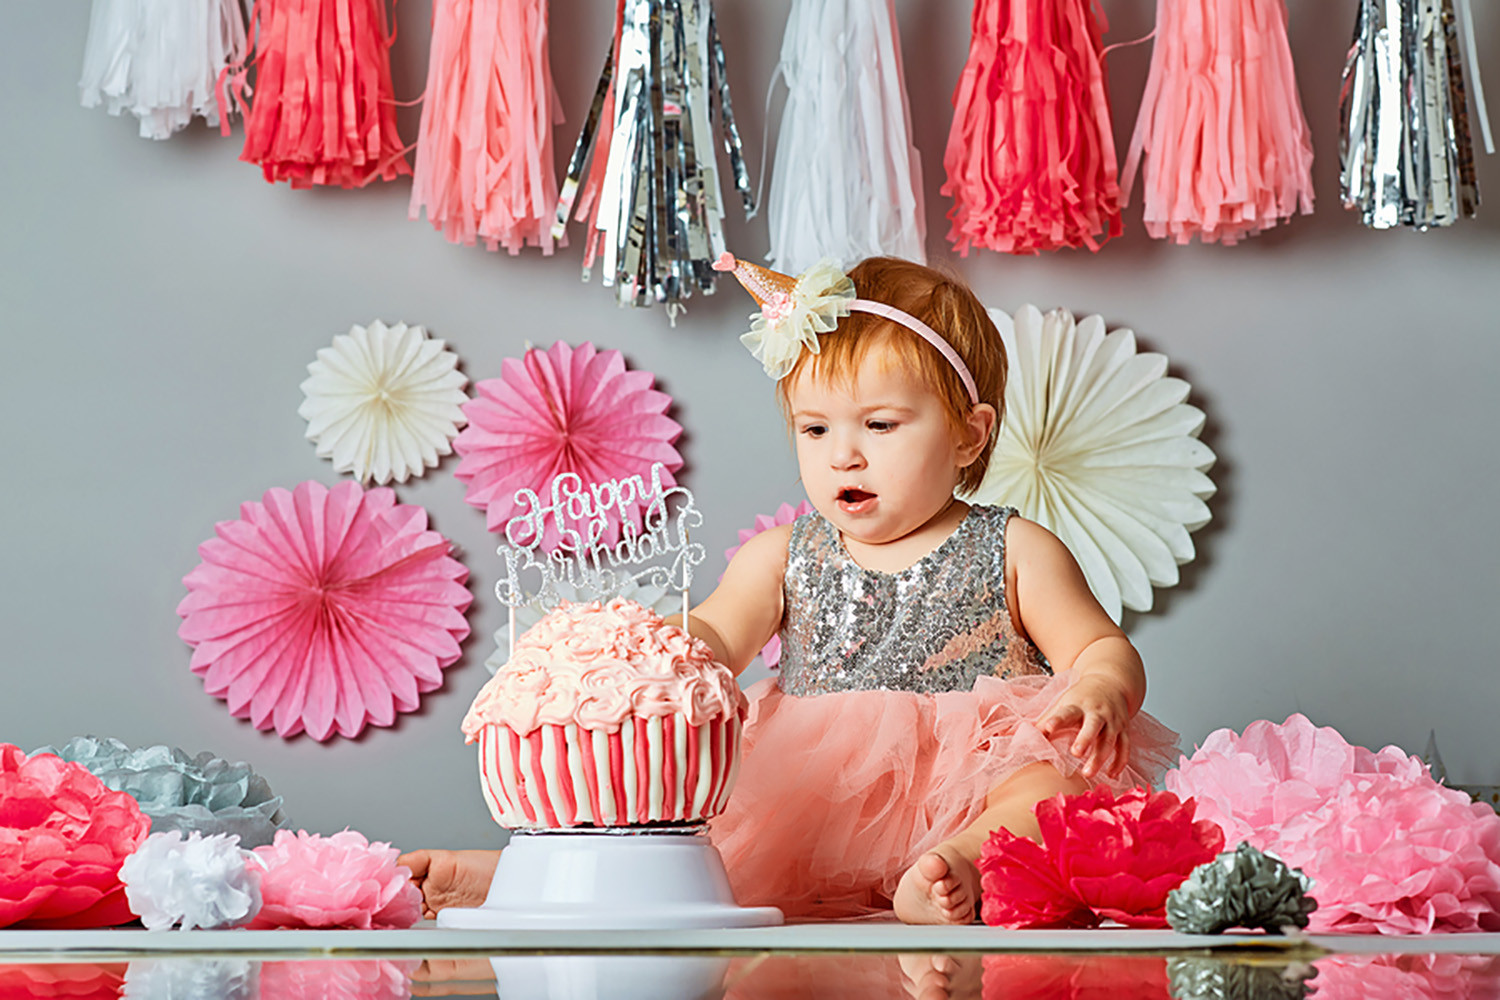 Gift Ideas For Girls First Birthday
 Baby s 1st Birthday Gifts & Party Ideas for Boys & Girls